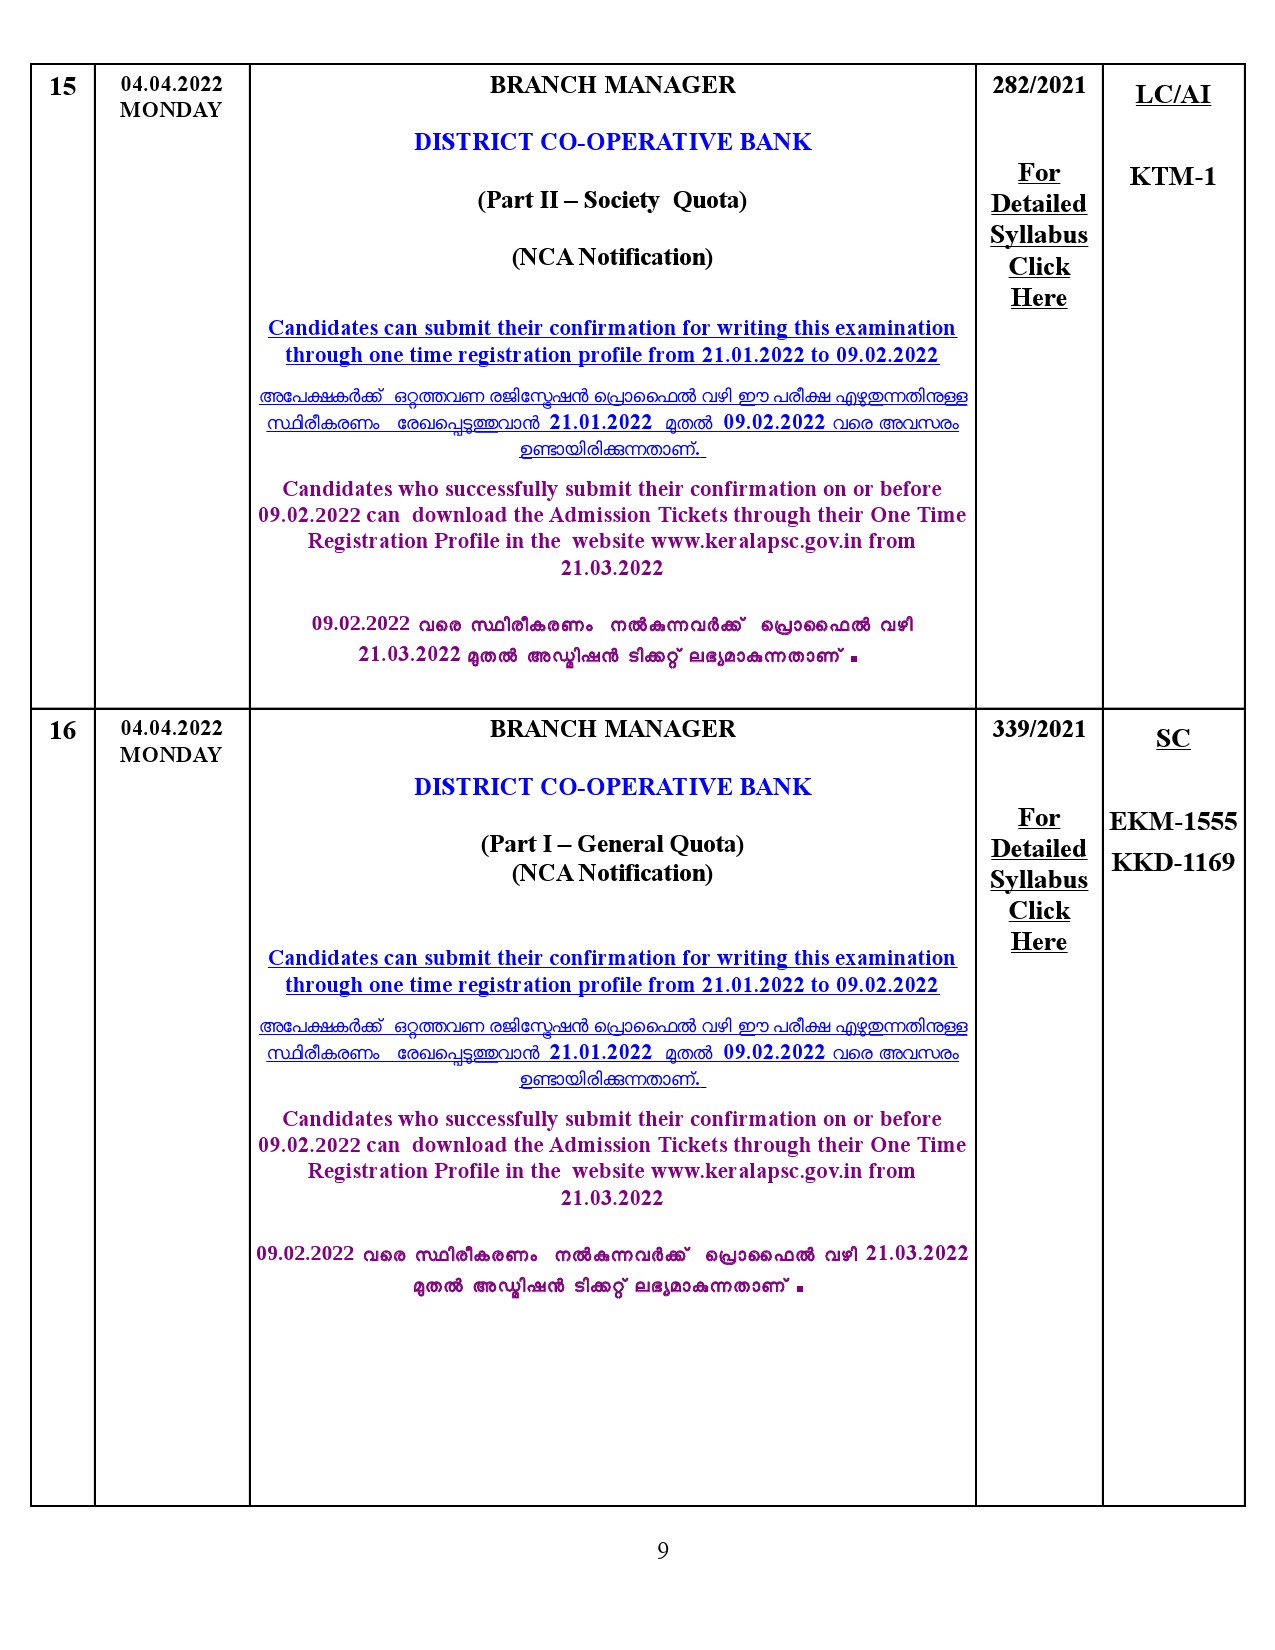 Examination Programme For The Month Of April 2022 - Notification Image 9